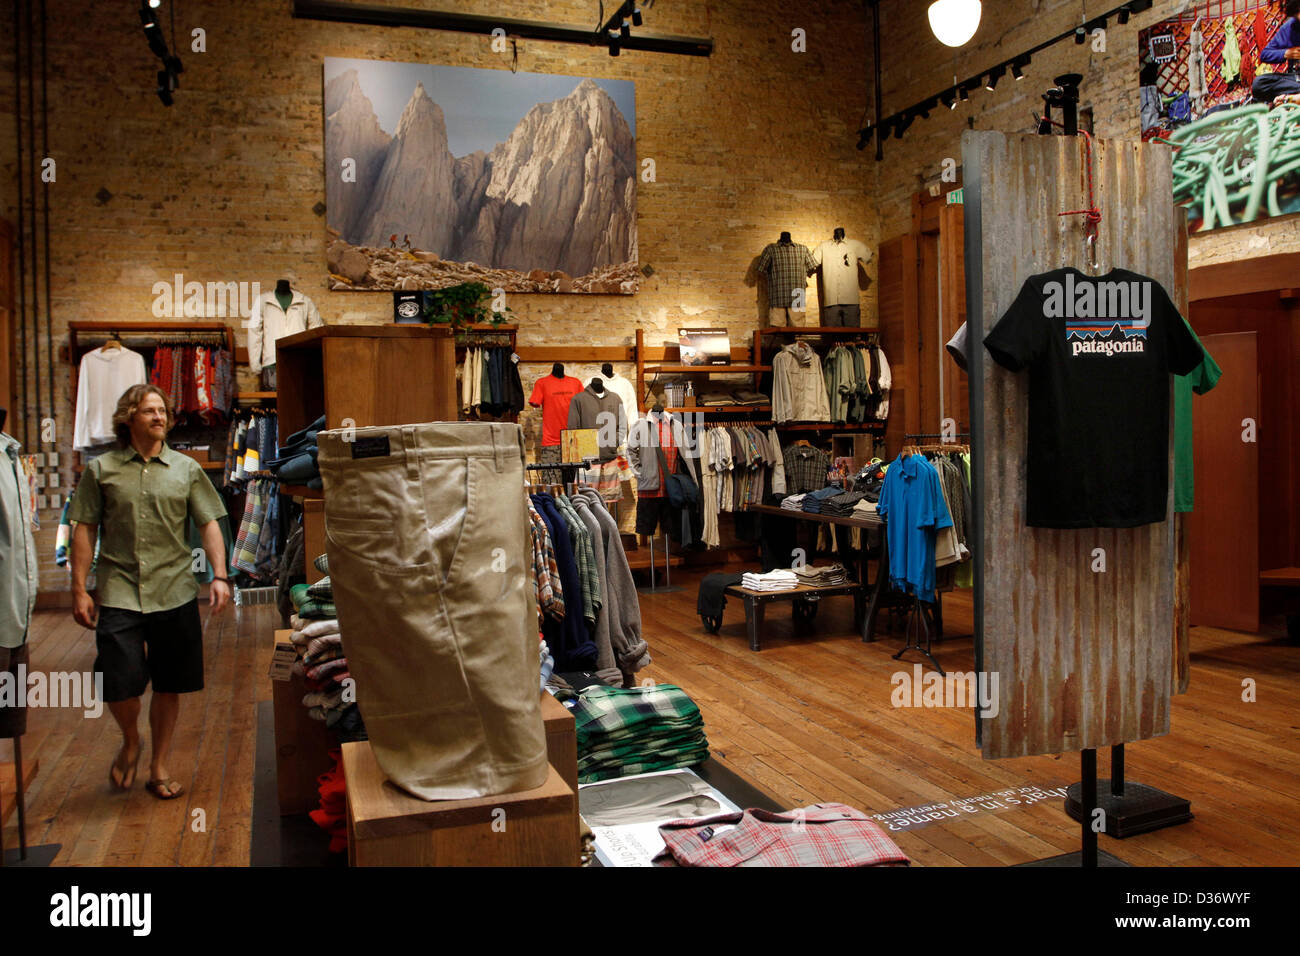 Jun 08, 2012 - Ventura, California, U.S. - The retail shop at Patagonia.  Patagonia produces high-end outdoor clothing, surf clothing, surfboard  manufacturing and is a member of several environmental movements. (Credit  Image: ©